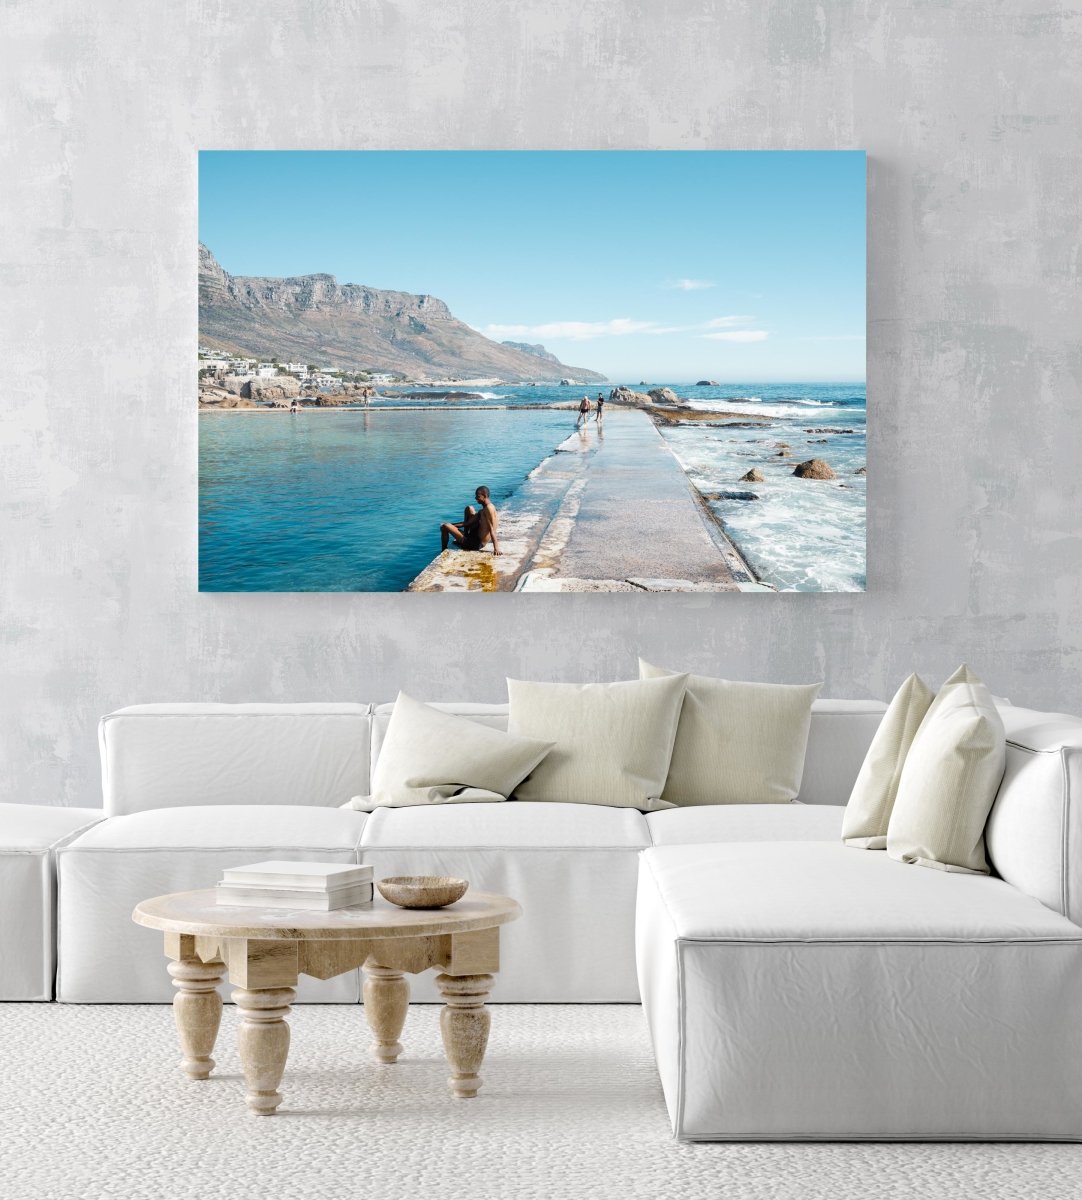 Man sitting along edge of Camps Bay pool with twelve apostles mountains in background in an acrylic/perspex frame